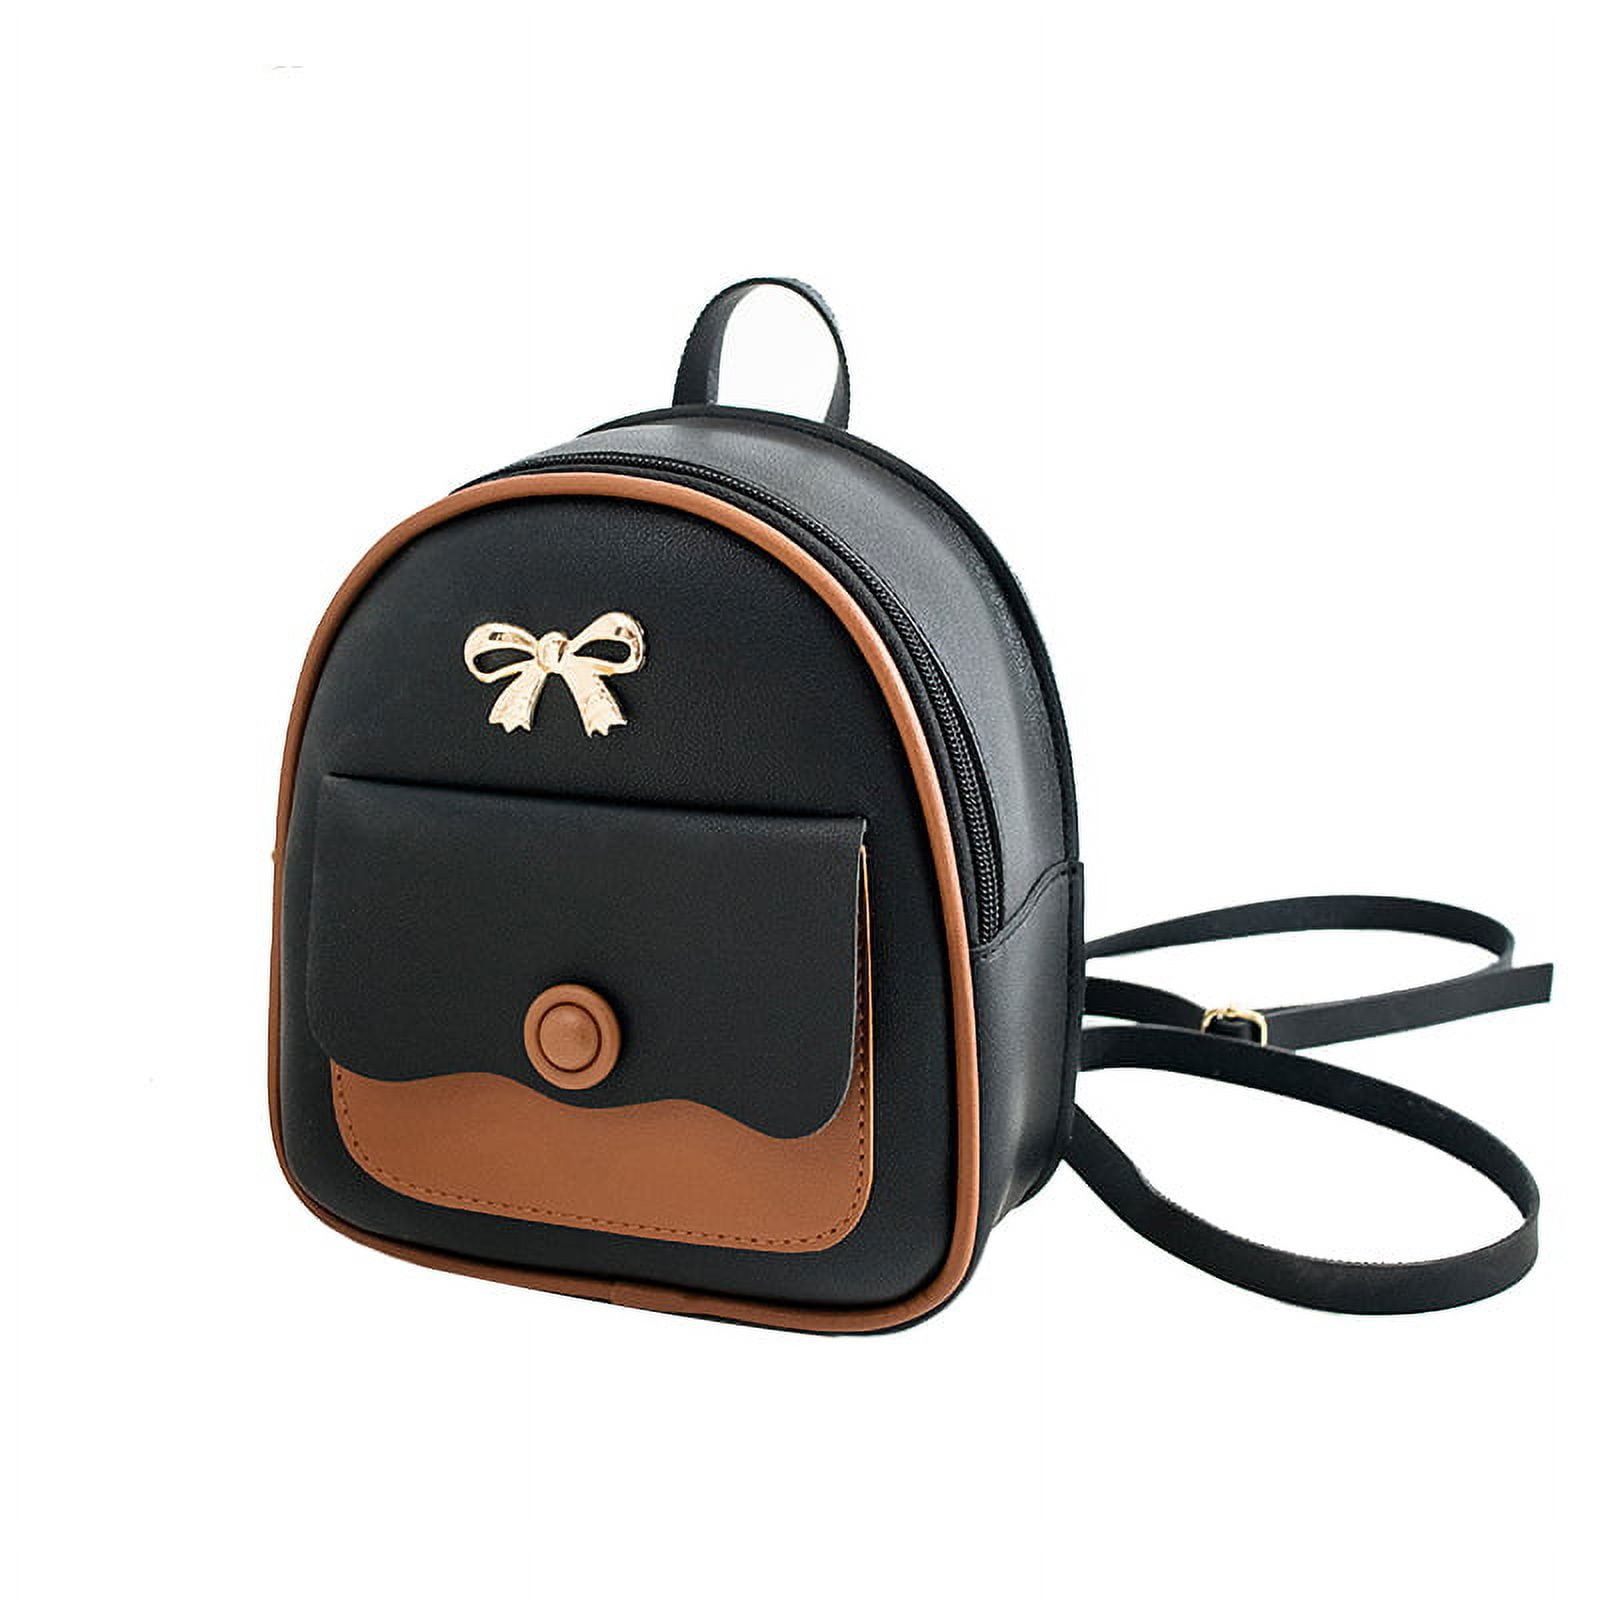 Buy Small 1 L Backpack Mini Backpack Girls Cute Small Backpack Purse Women  Travel Shoulder Purse Bag (Black) at Amazon.in